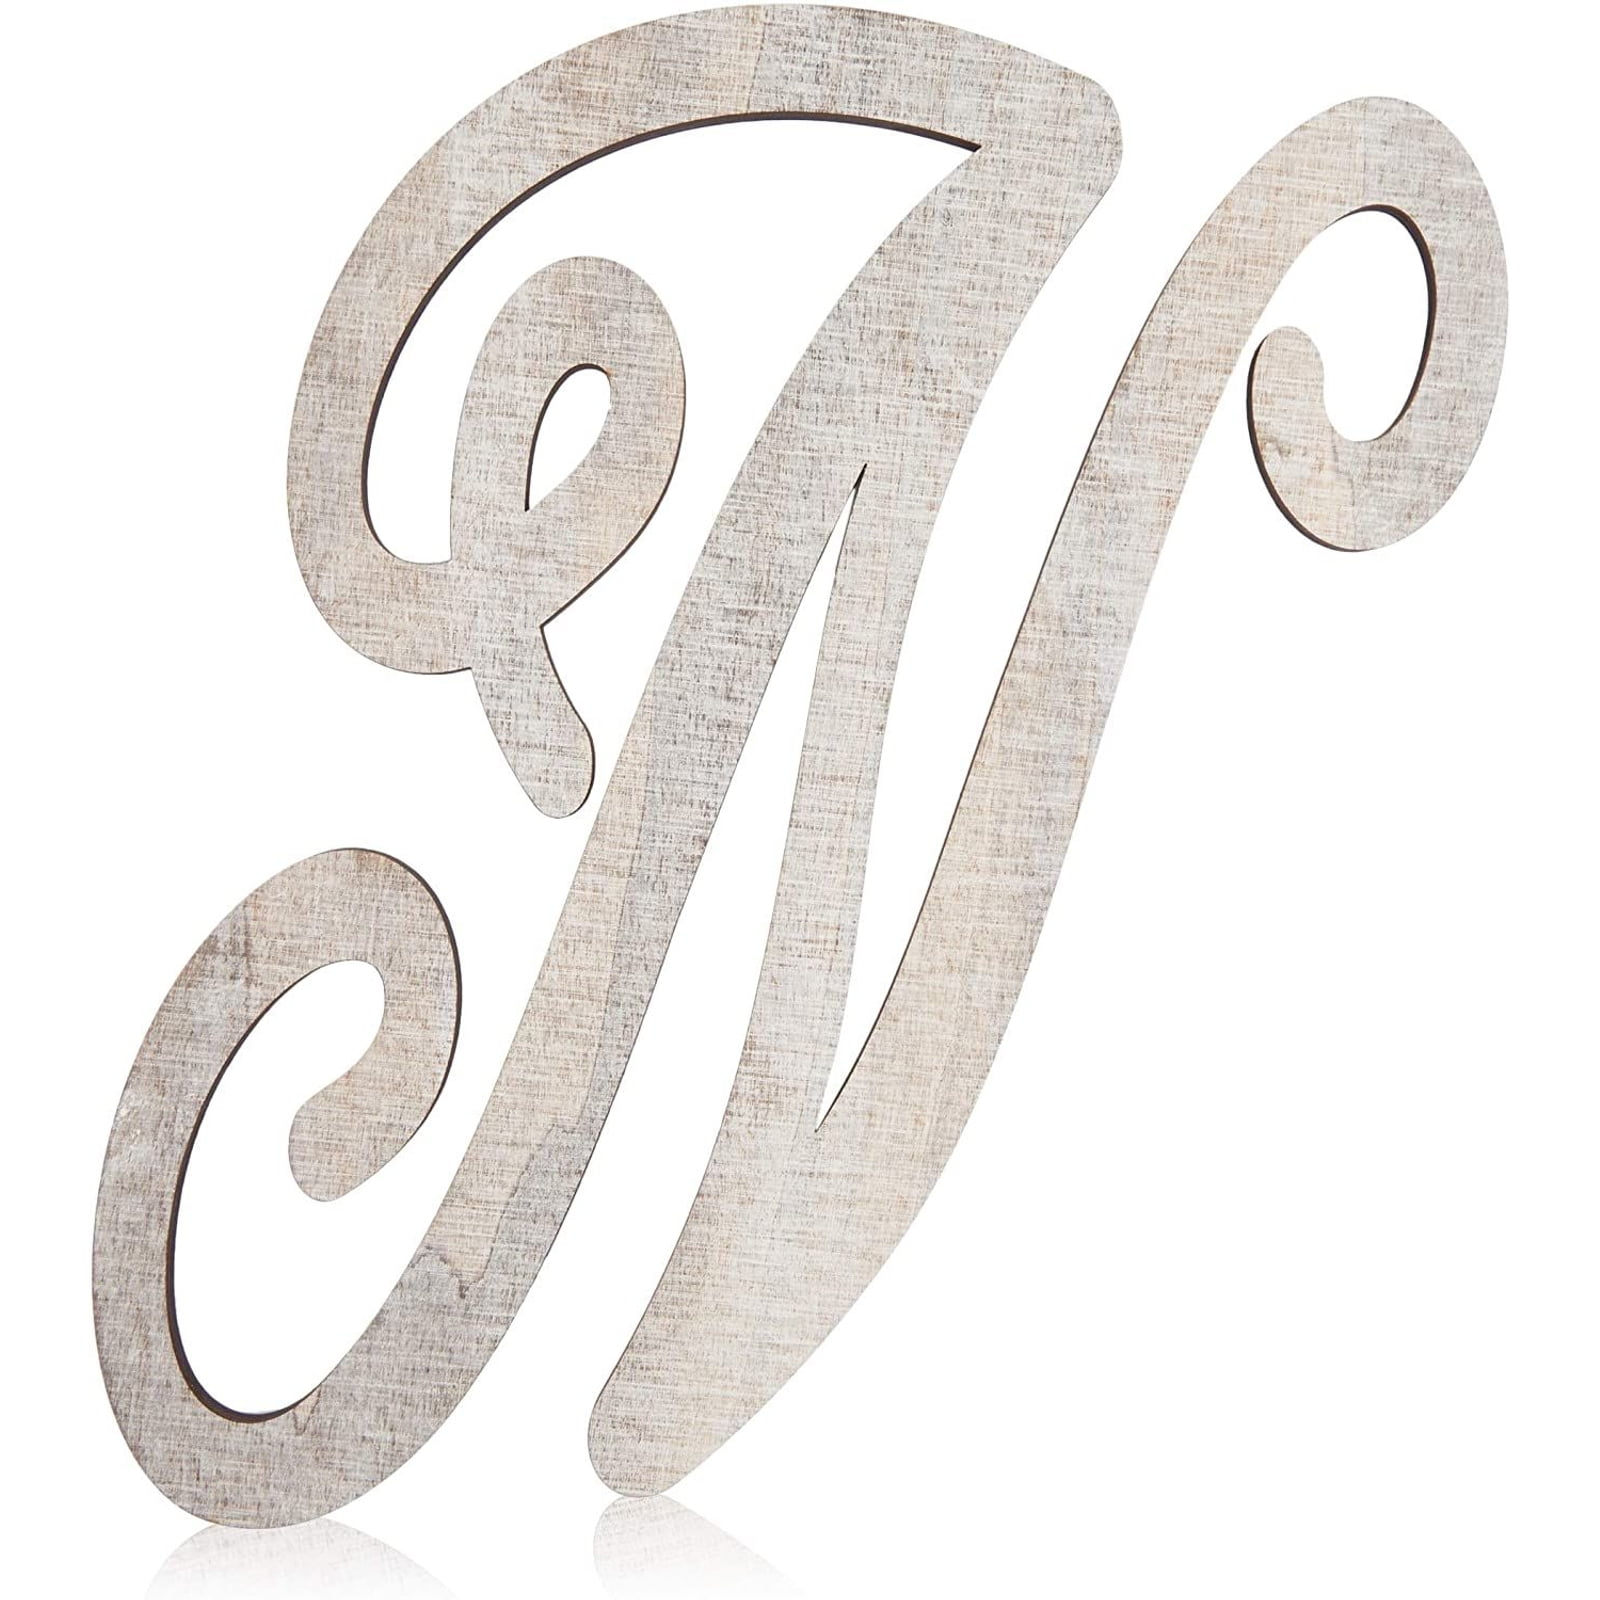 decorative initial wooden letters for wall, cursive letter wall decor,  wooden letters wedding monogram or apartment decor